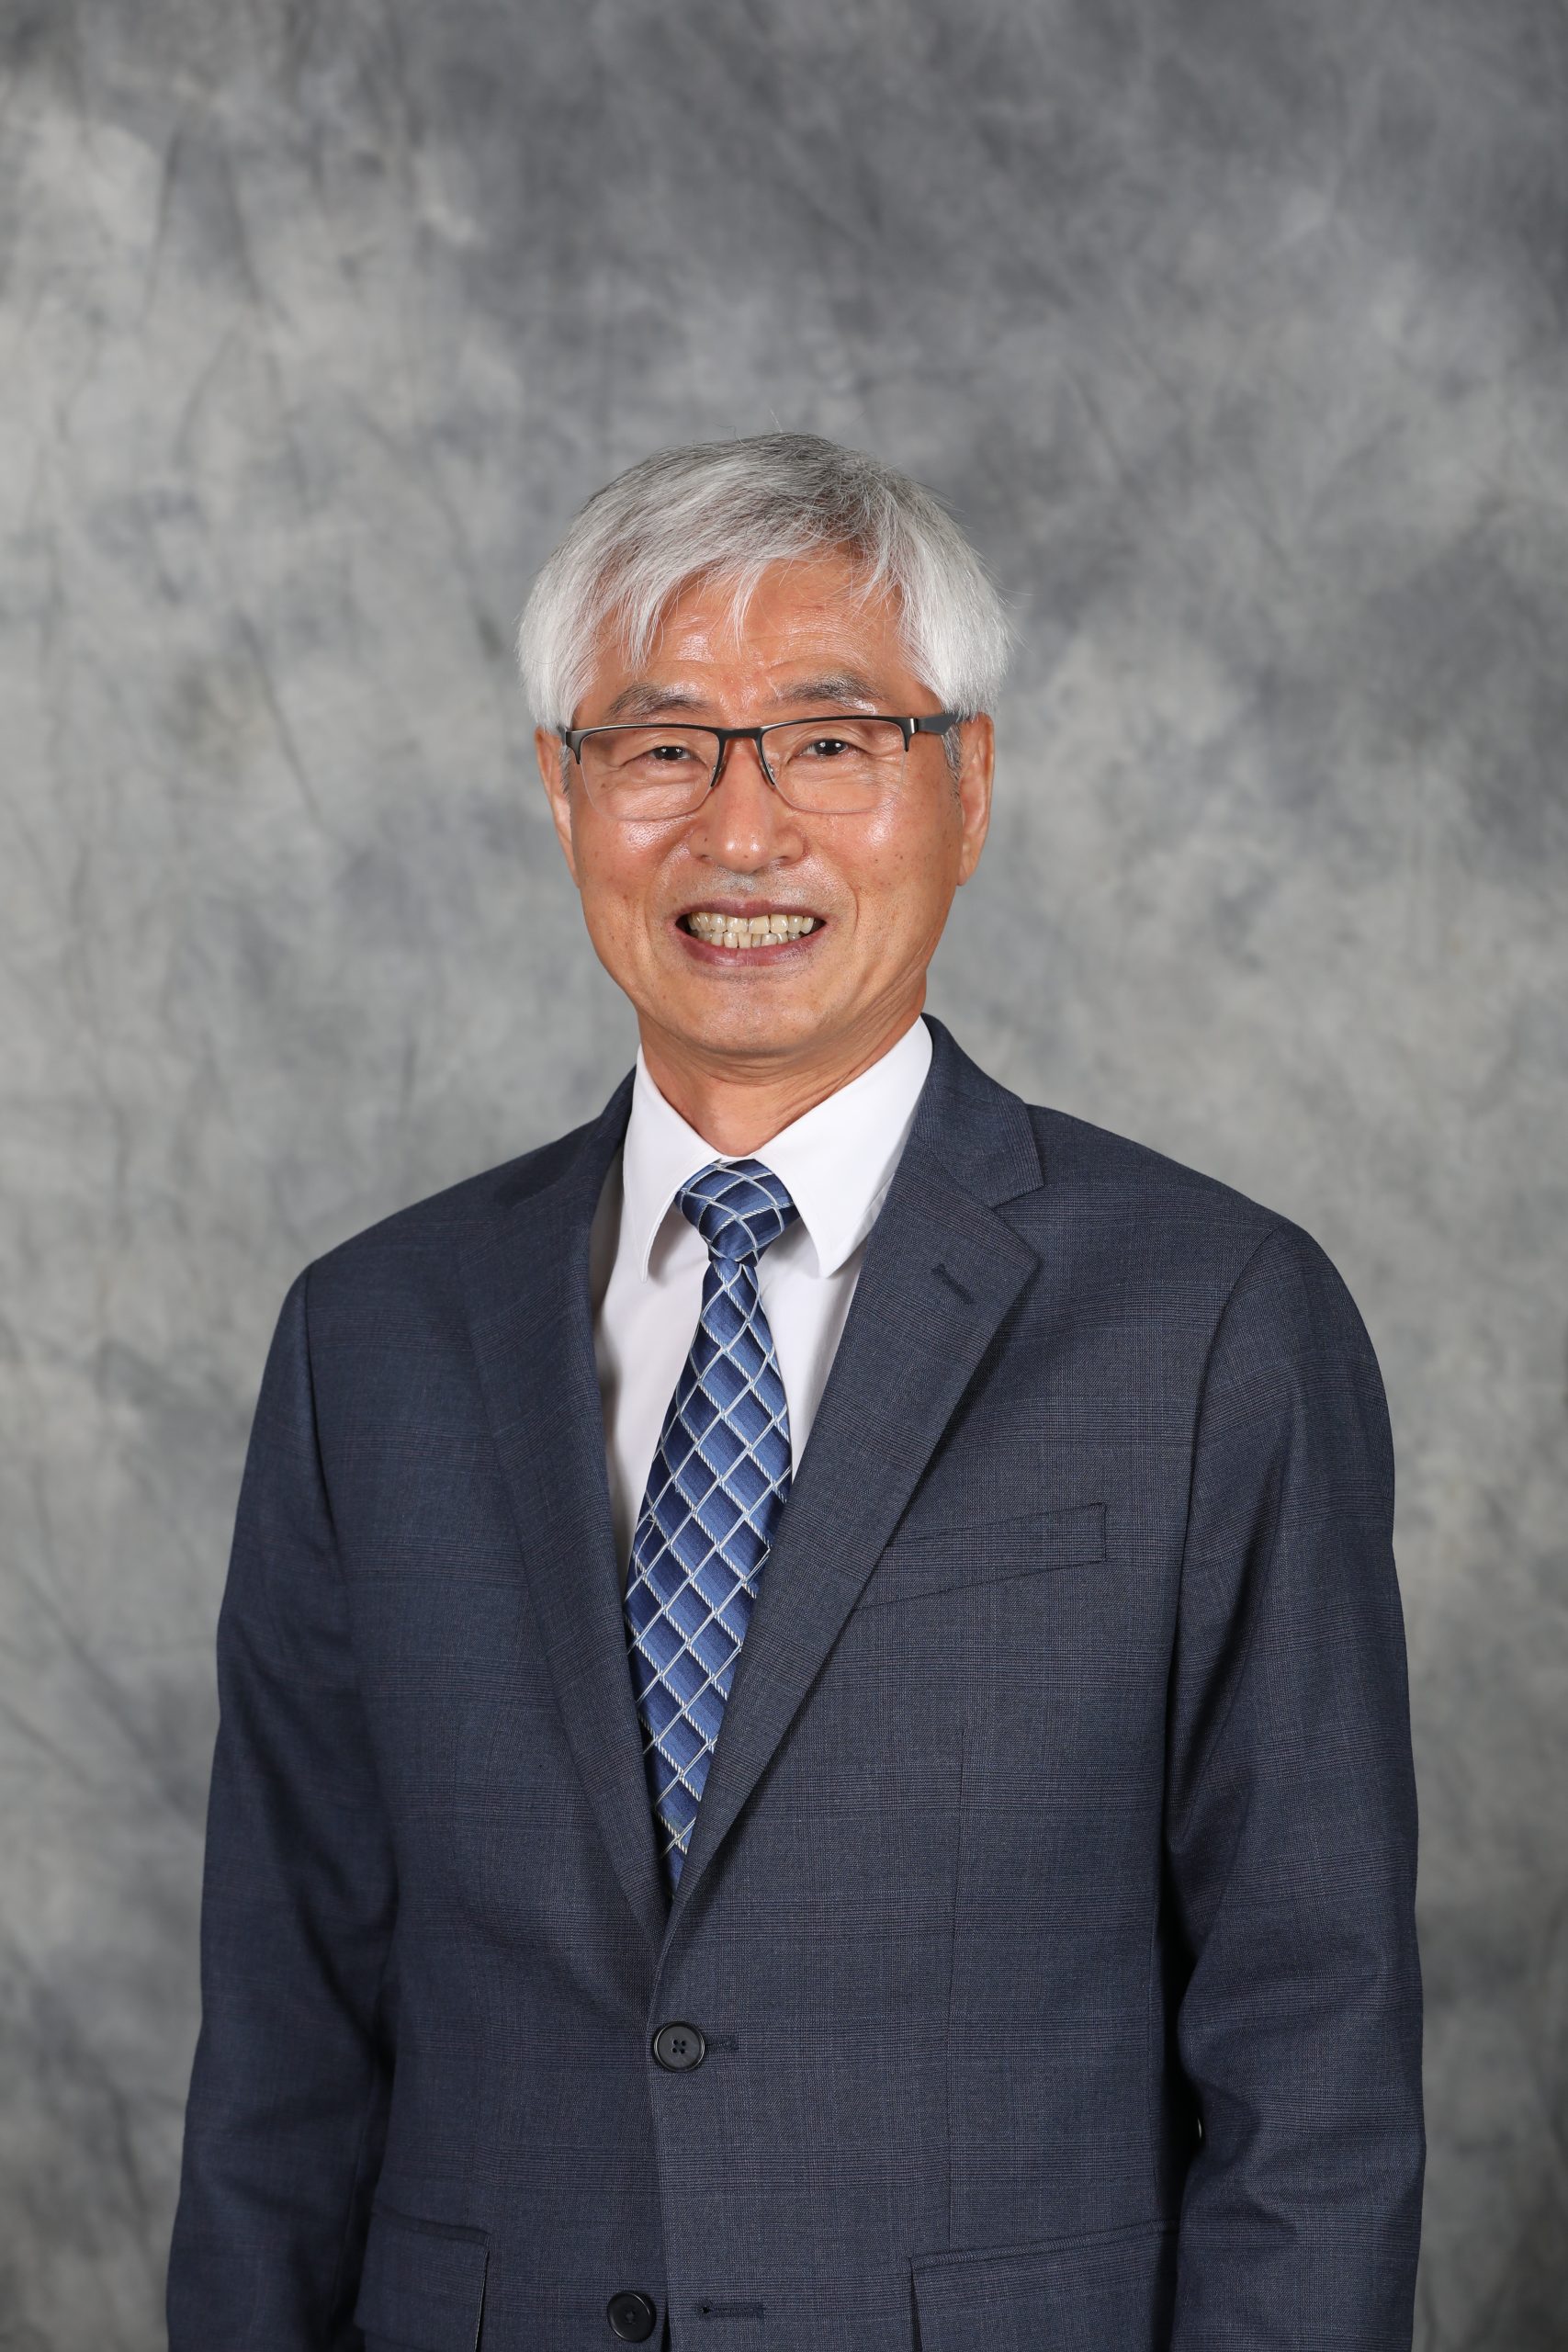 The University of Arkansas at Little Rock has honored Dr. Sung-kwan Kim, professor of business information systems, with the 2022 Harper W. Boyd Jr. Professor of Excellence Award.